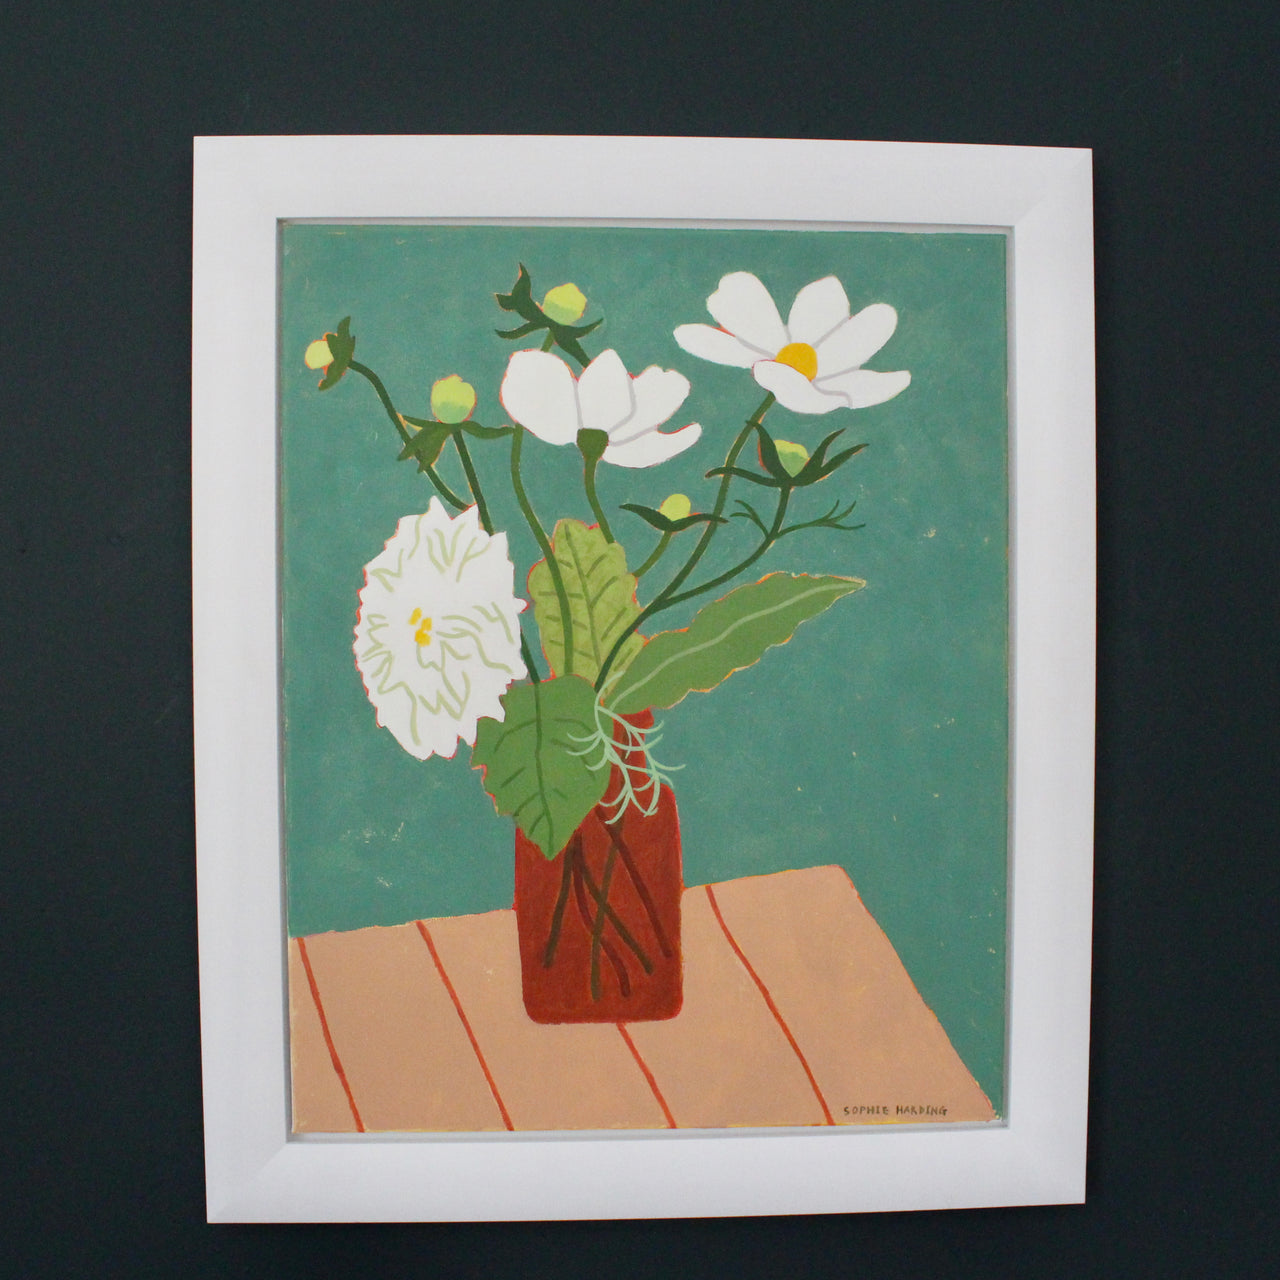 a framed a painting by artist Sophie Harding of white flowers on a wooden table with a green background 